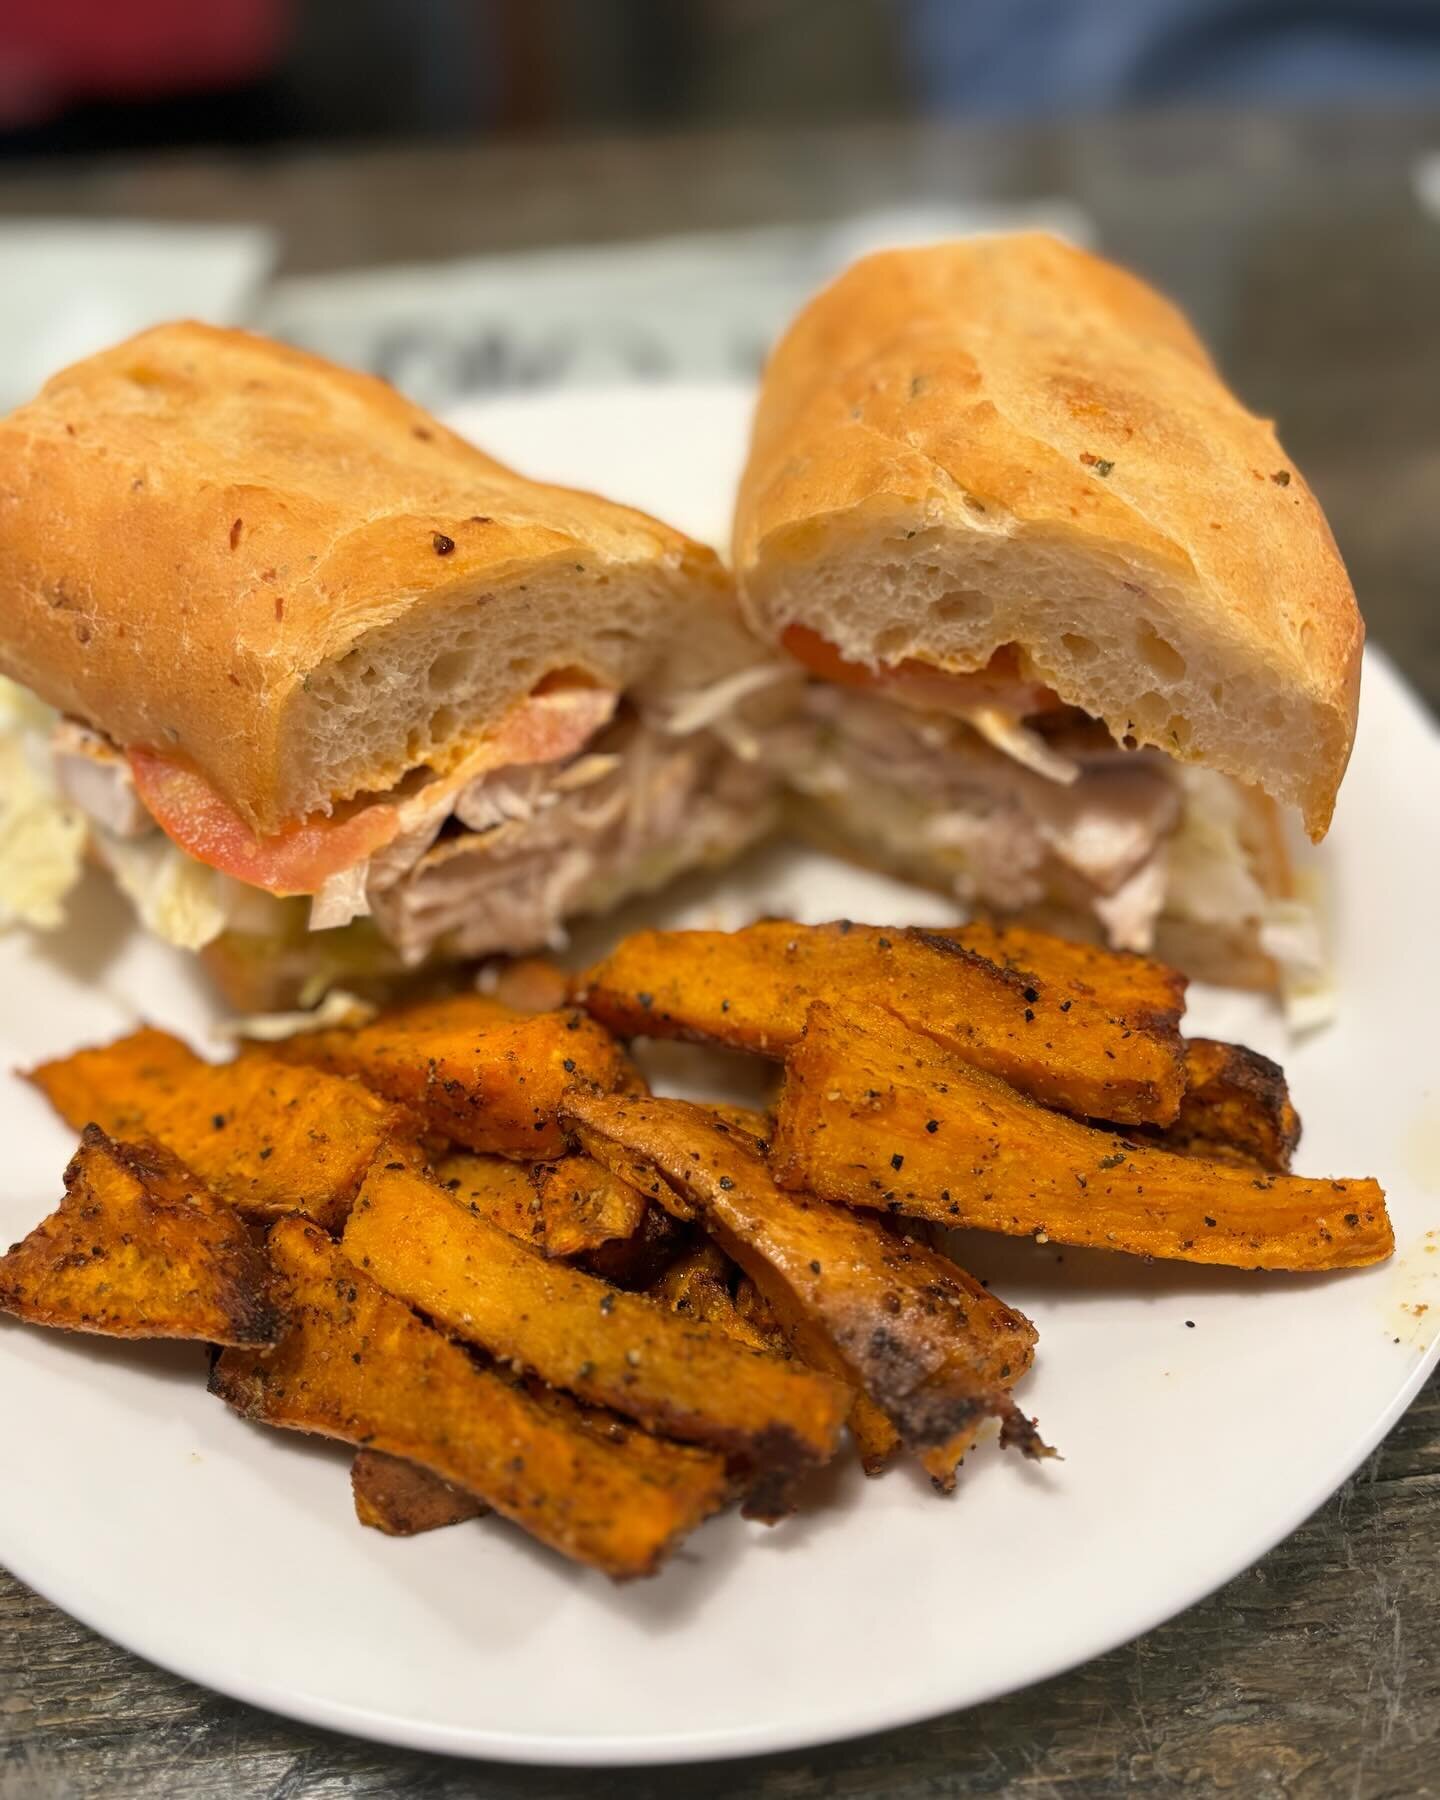 Special of the day : local Amber Jack PO&rsquo;Boy. Grilled,blackened or fried amber jack, Napa cabbage , tomato, and spicy aioli  on potato rosemary baguette. Served with choice of side . #warehousebakeryanddonuts #bakery #madefromscratch #amberjack